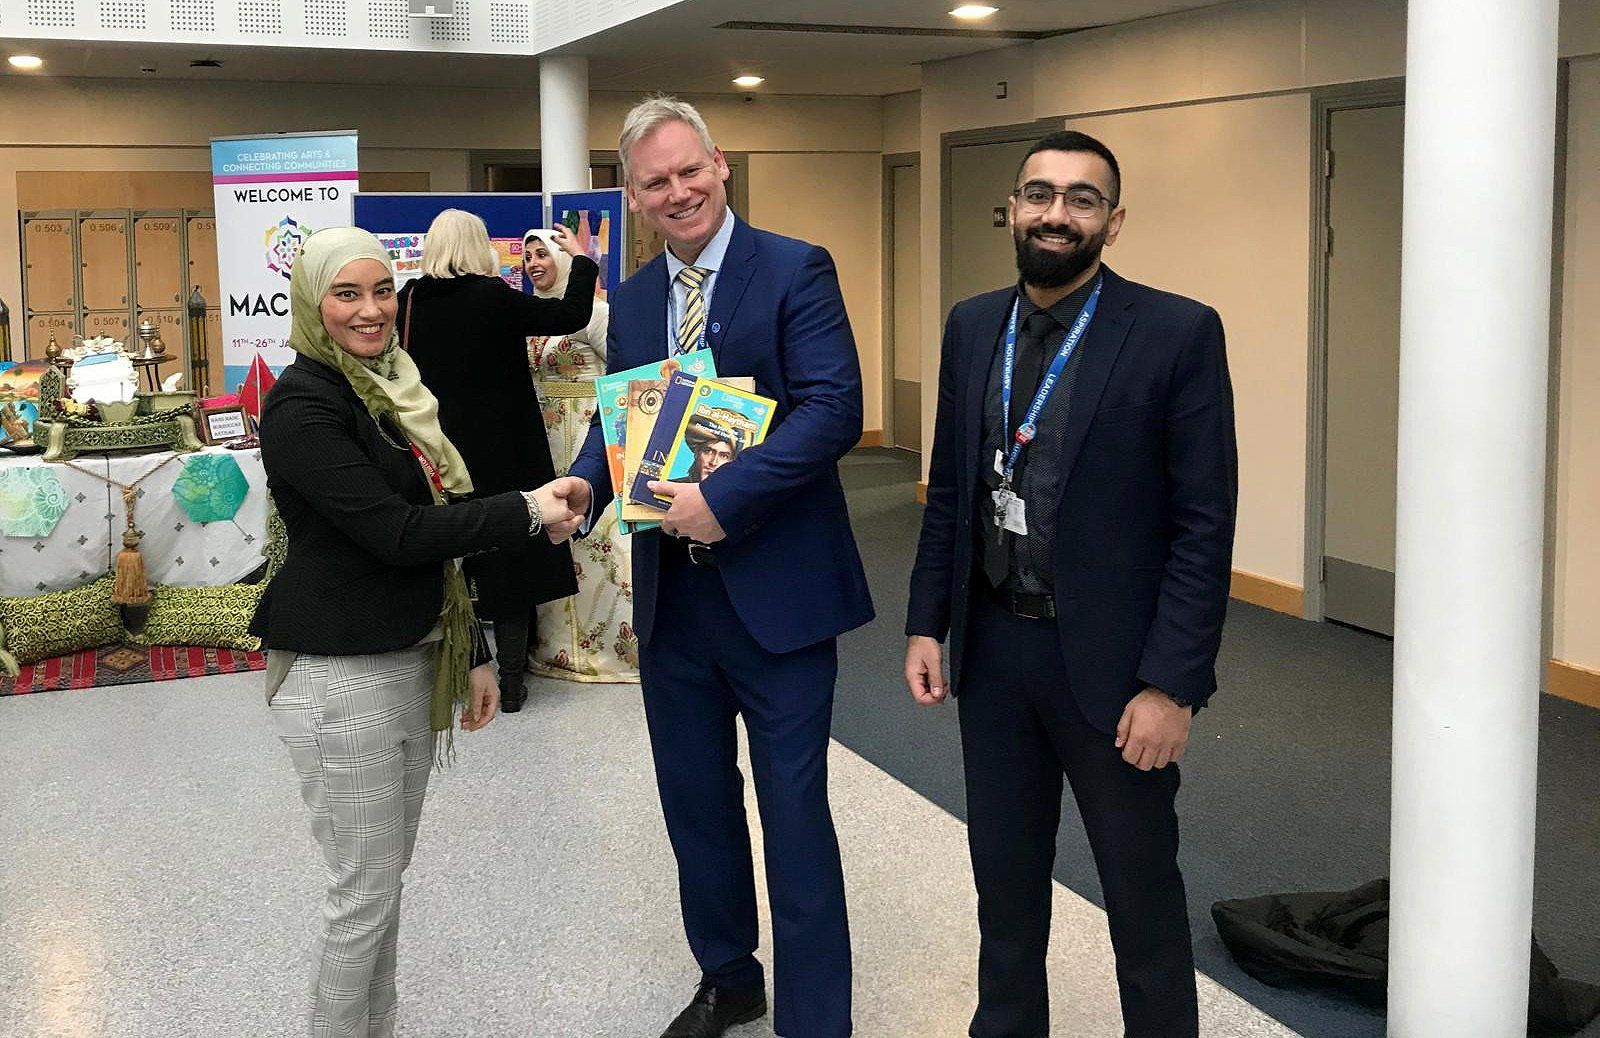 Dr. Sameena Haq (Left) presenting Books to Mr. Kevin Green, the Principal (Centre) and Mr. Imran Khan Aslam (Assistant Head of Department and Director of Standards).